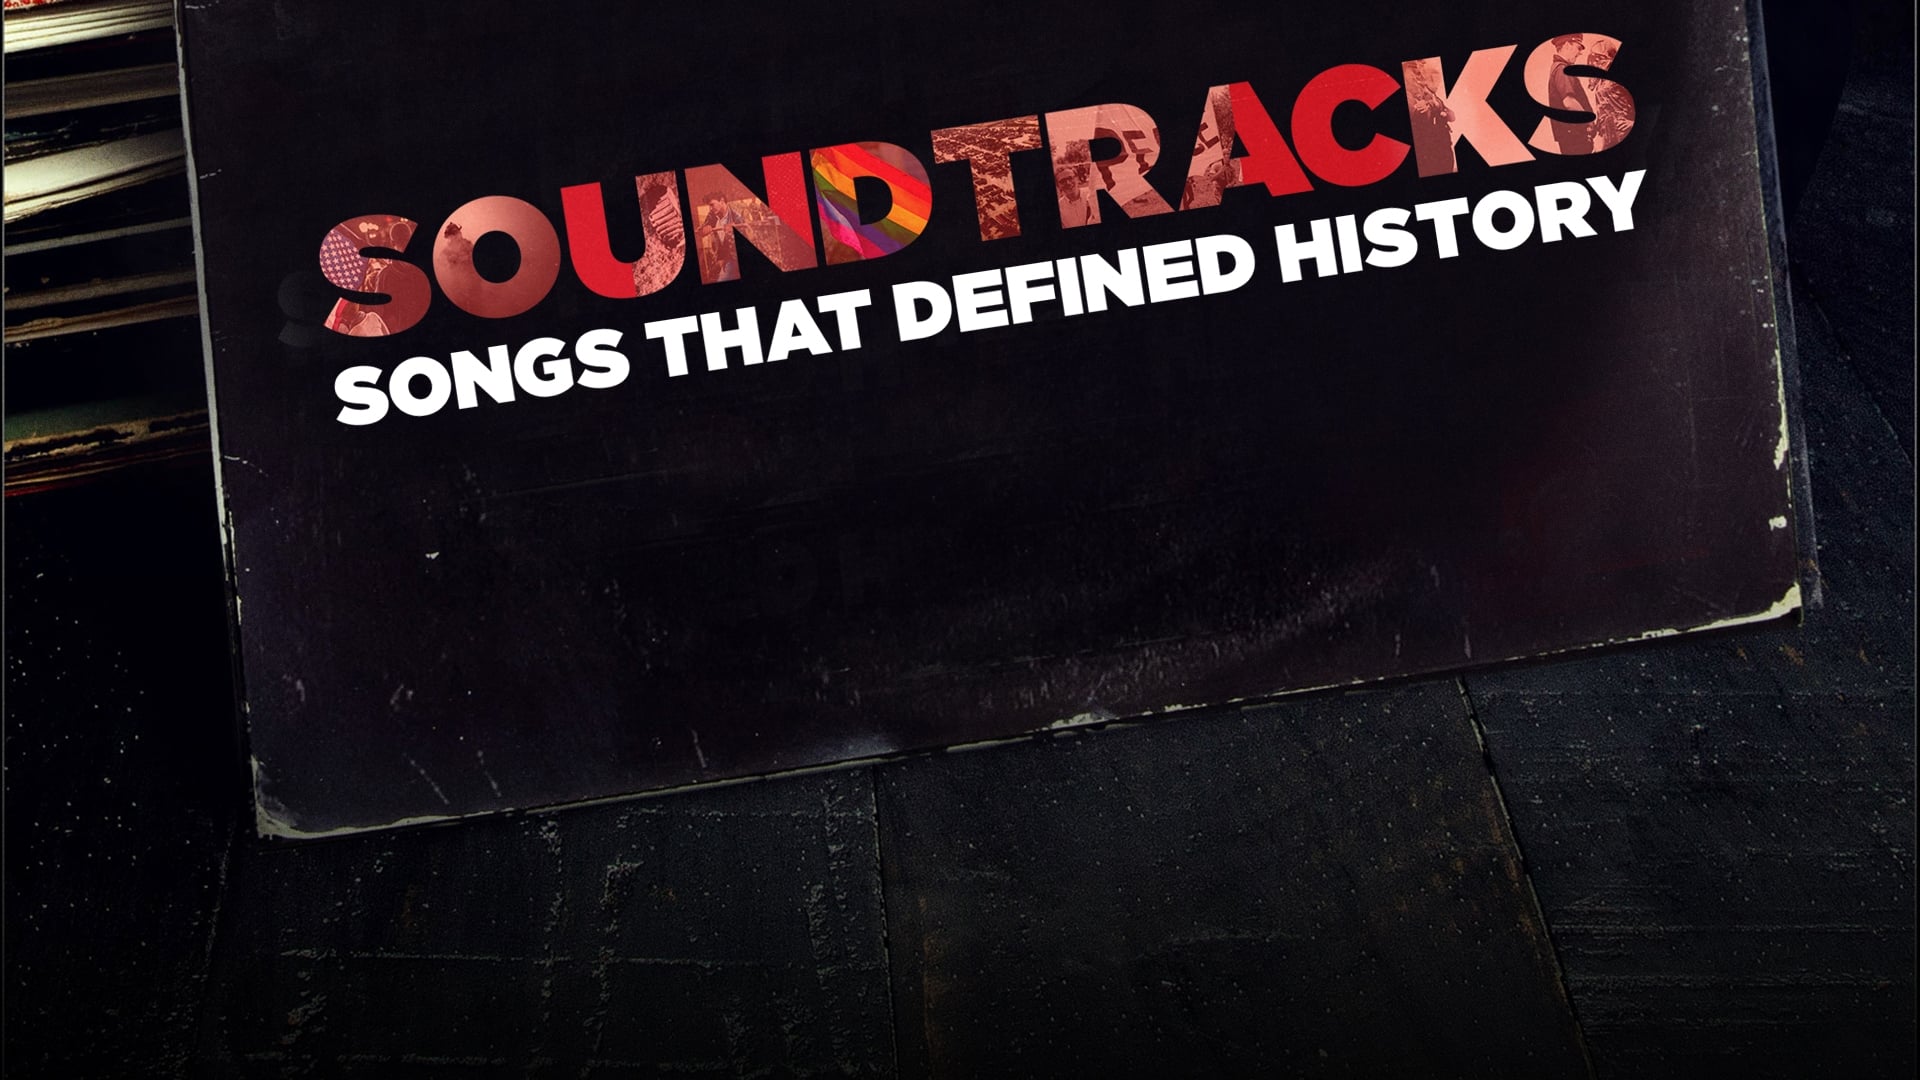 Soundtracks: Songs That Defined History Battle of the Sexes (TV